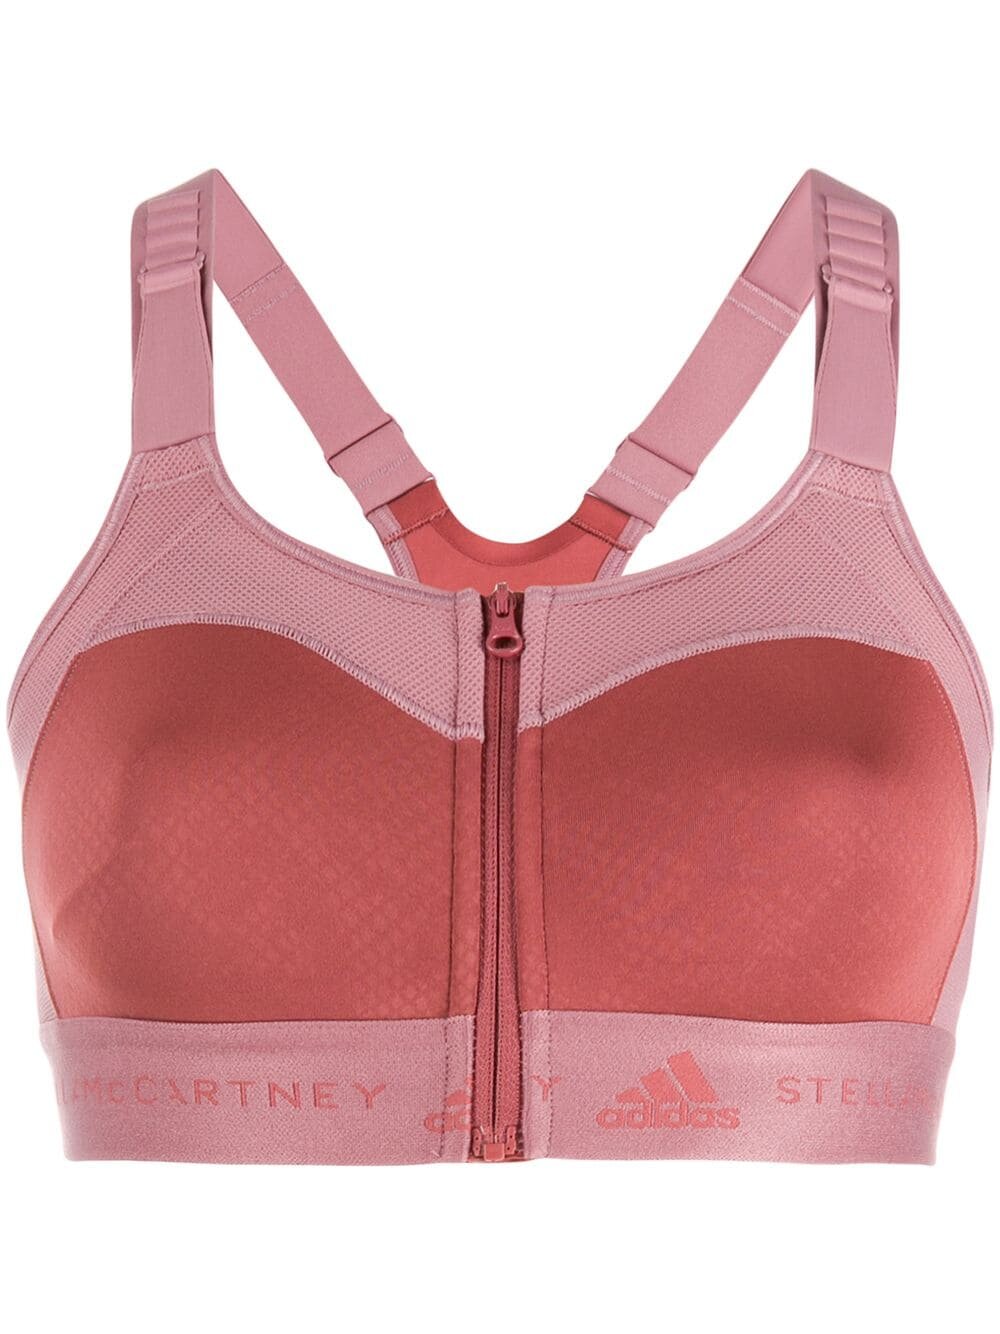 Finally, a post-mastectomy sports bra that melds form and function